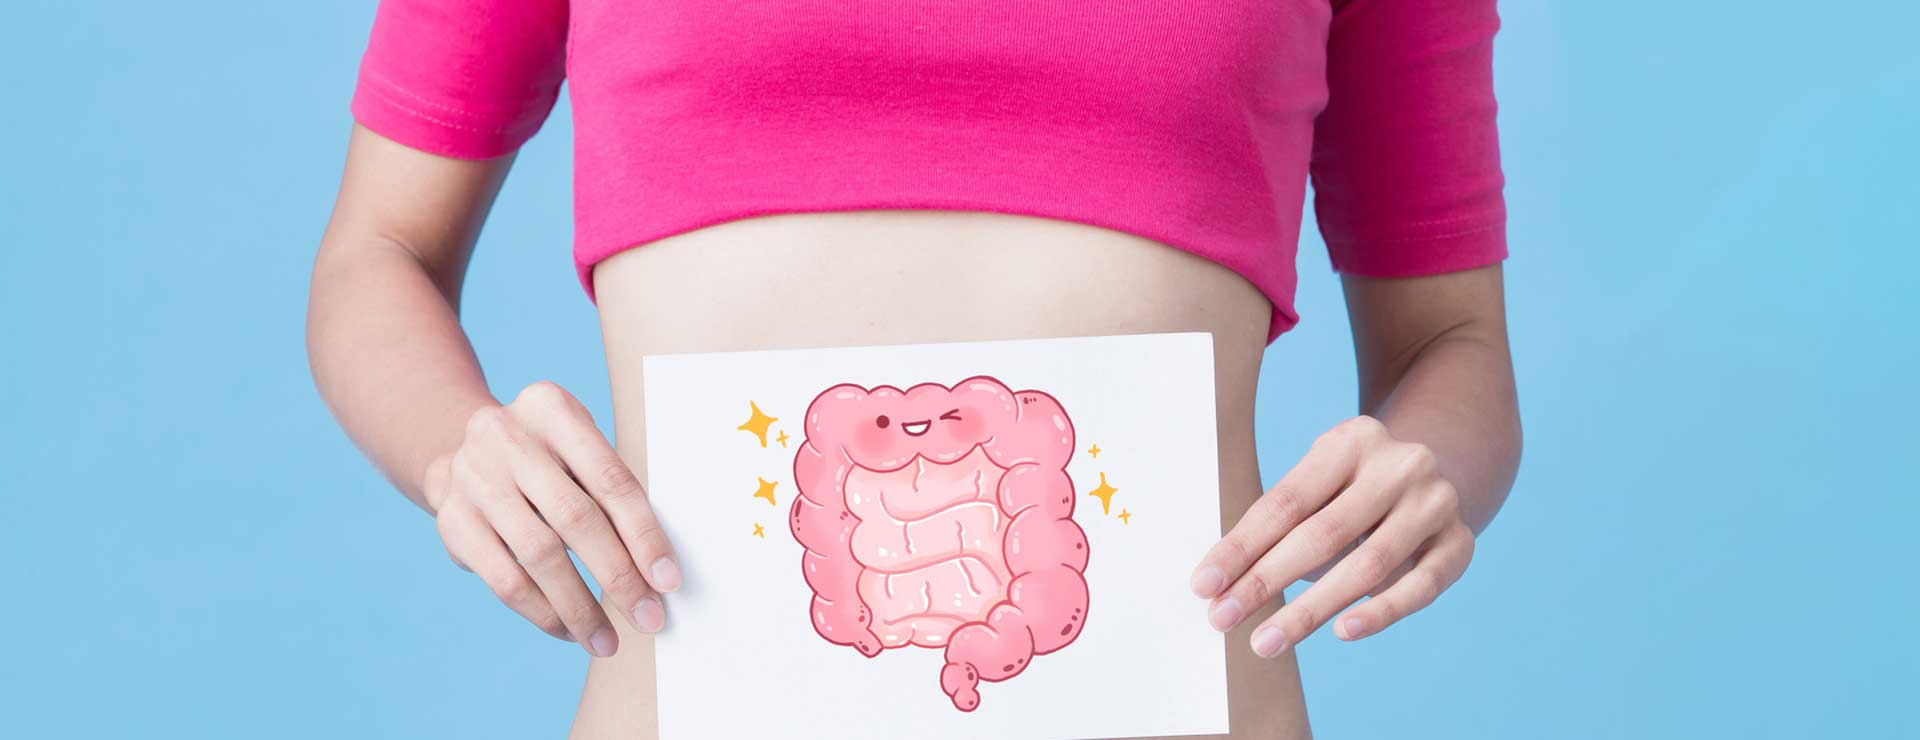 Your Digestive System: 5 Ways to Support Gut Health | Johns Hopkins Medicine